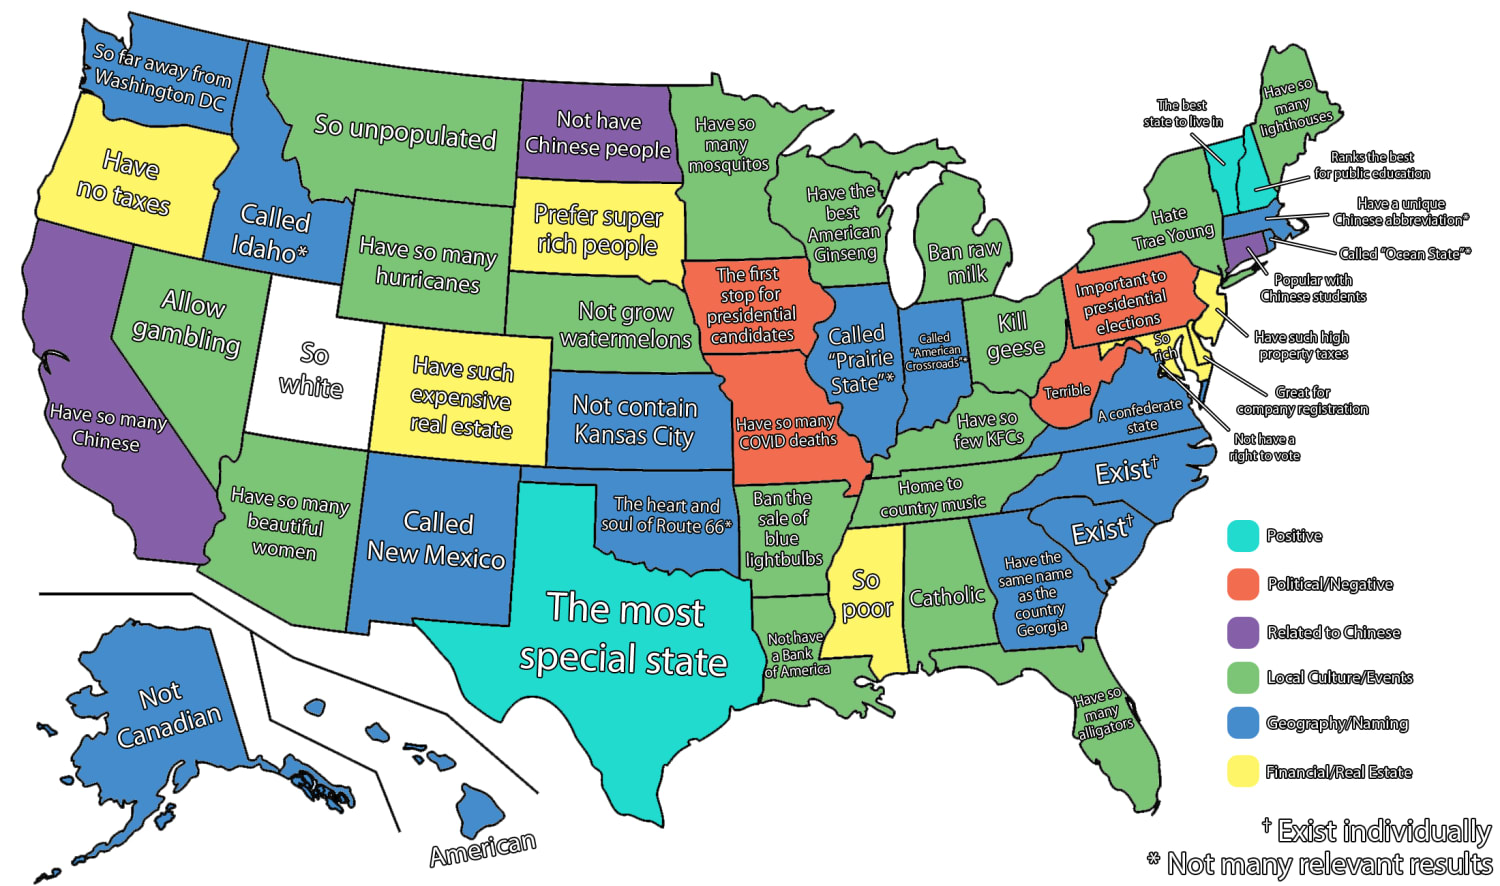 Map of the United States but with search results for "Why is/does [US state]..." from China's largest search engine, Baidu